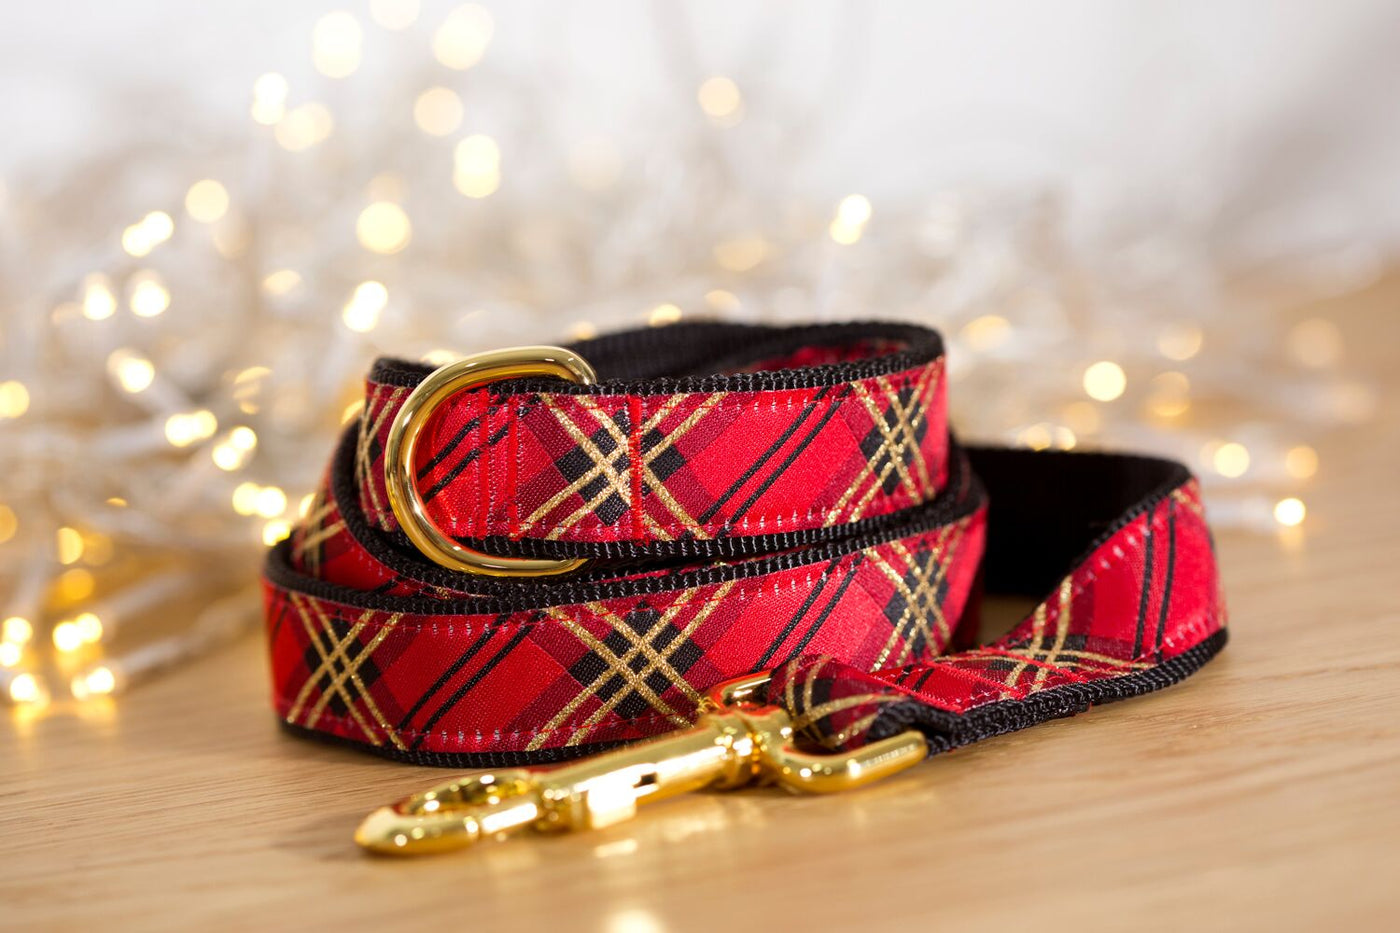 Red & Gold Plaid Dog Leash | Handmade to order |-Dizzy Dog Collars